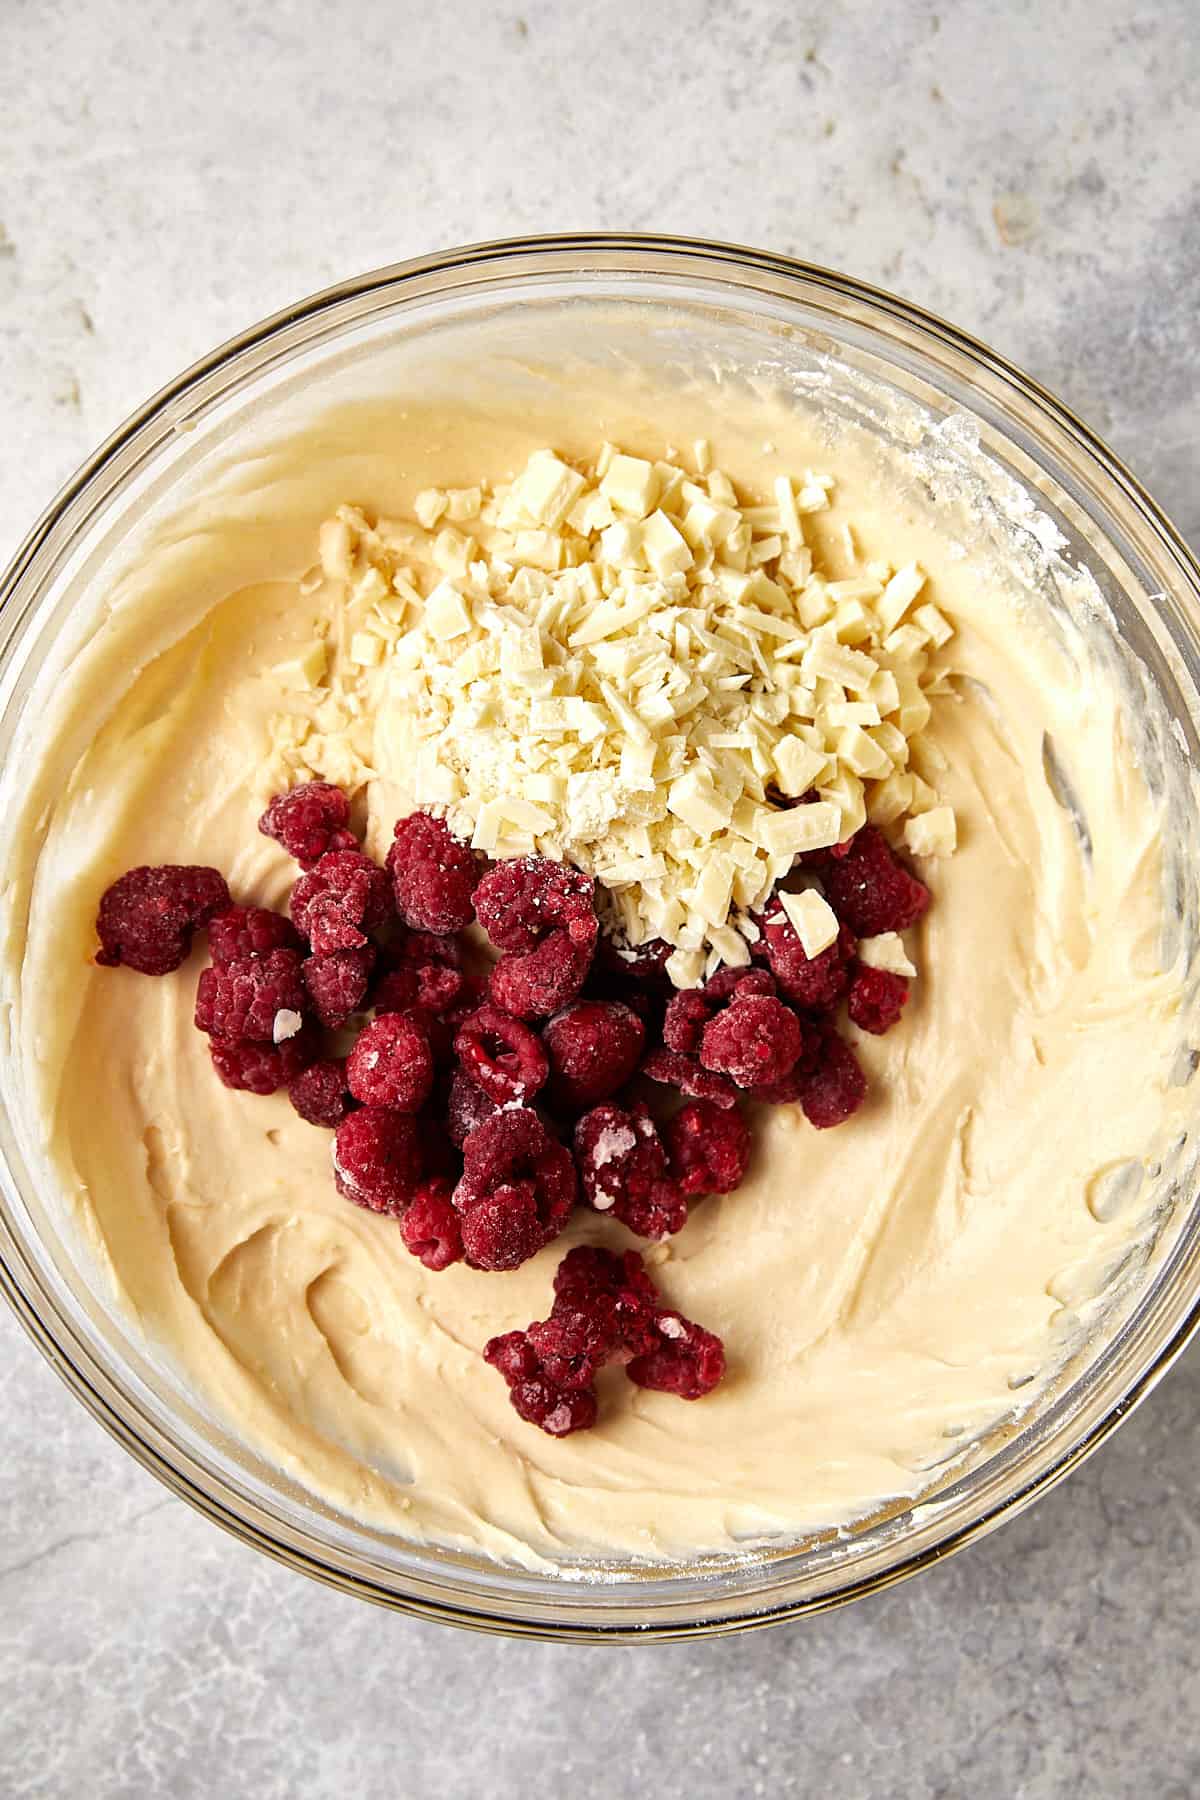 raspberries and white chocolate chunks added to batter.